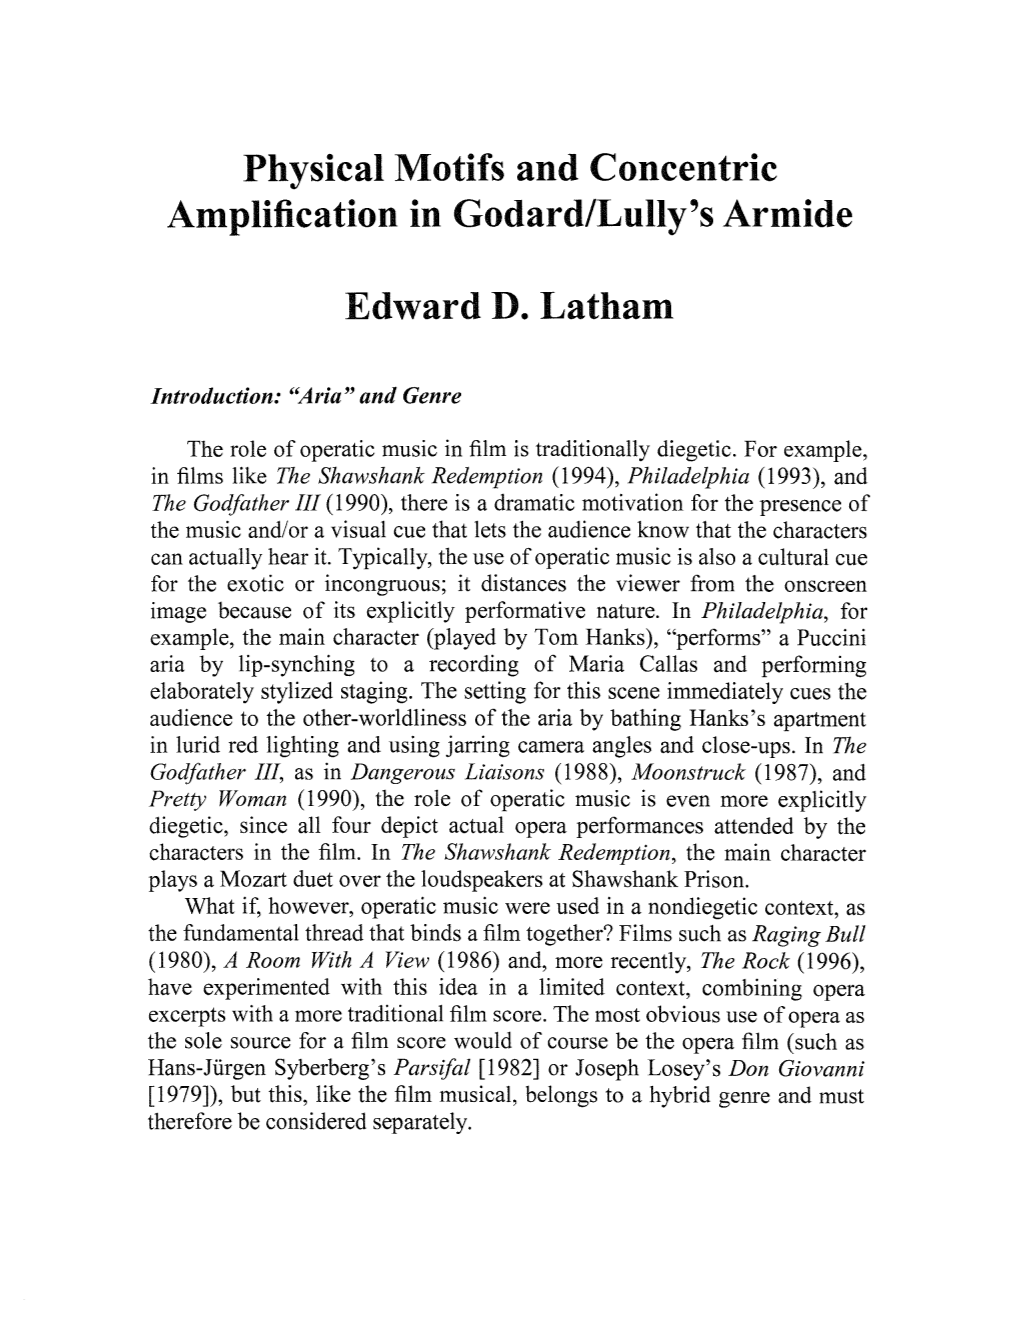 Physical Motifs and Concentric Amplification in Godard/Lully's Armide